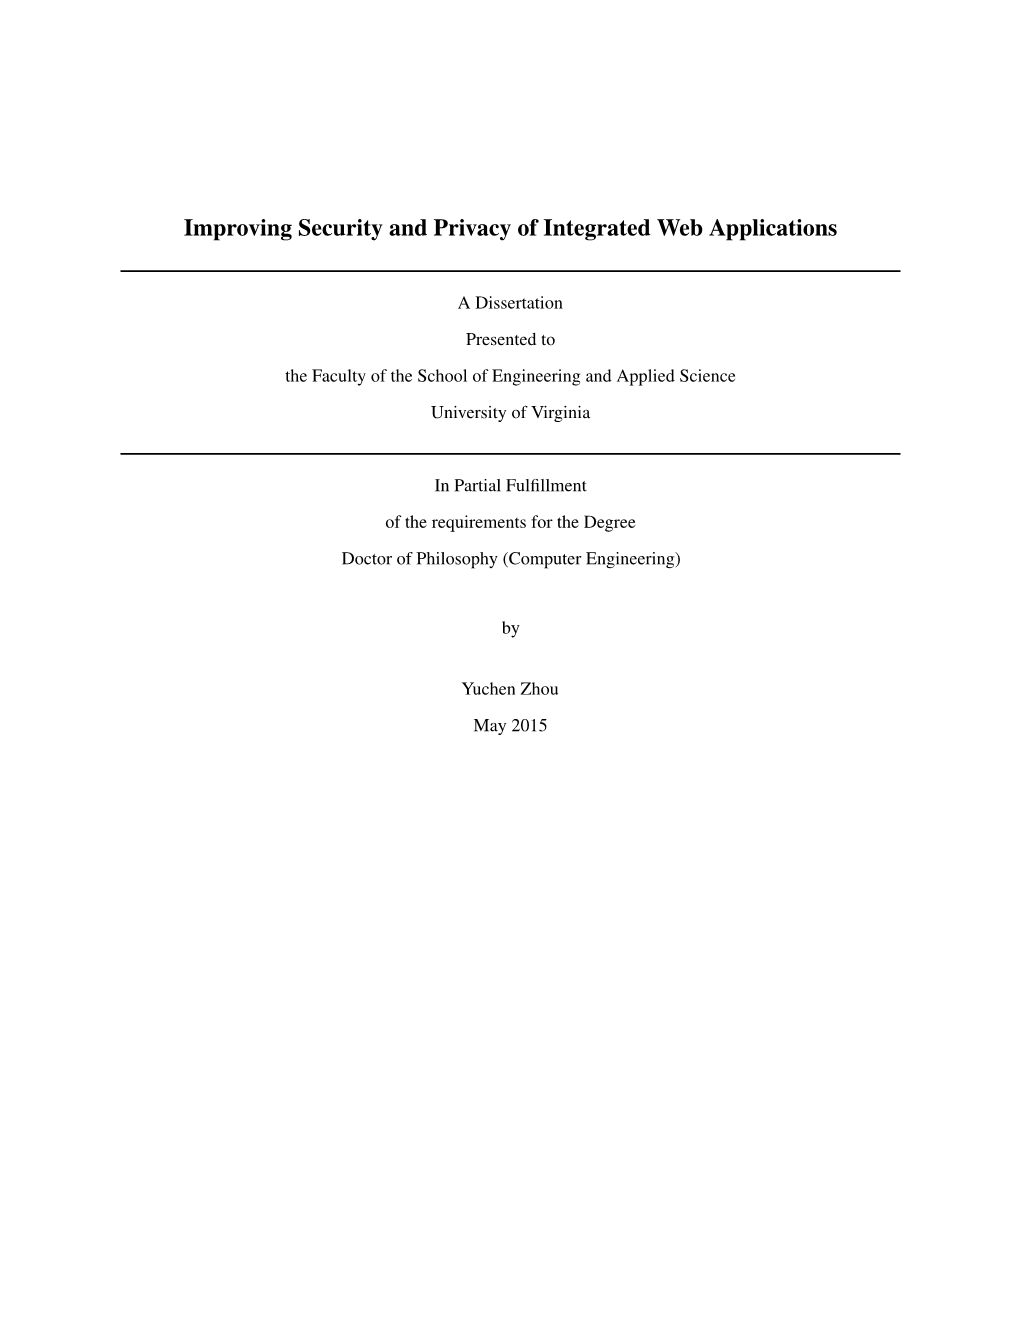 Improving Security and Privacy of Integrated Web Applications